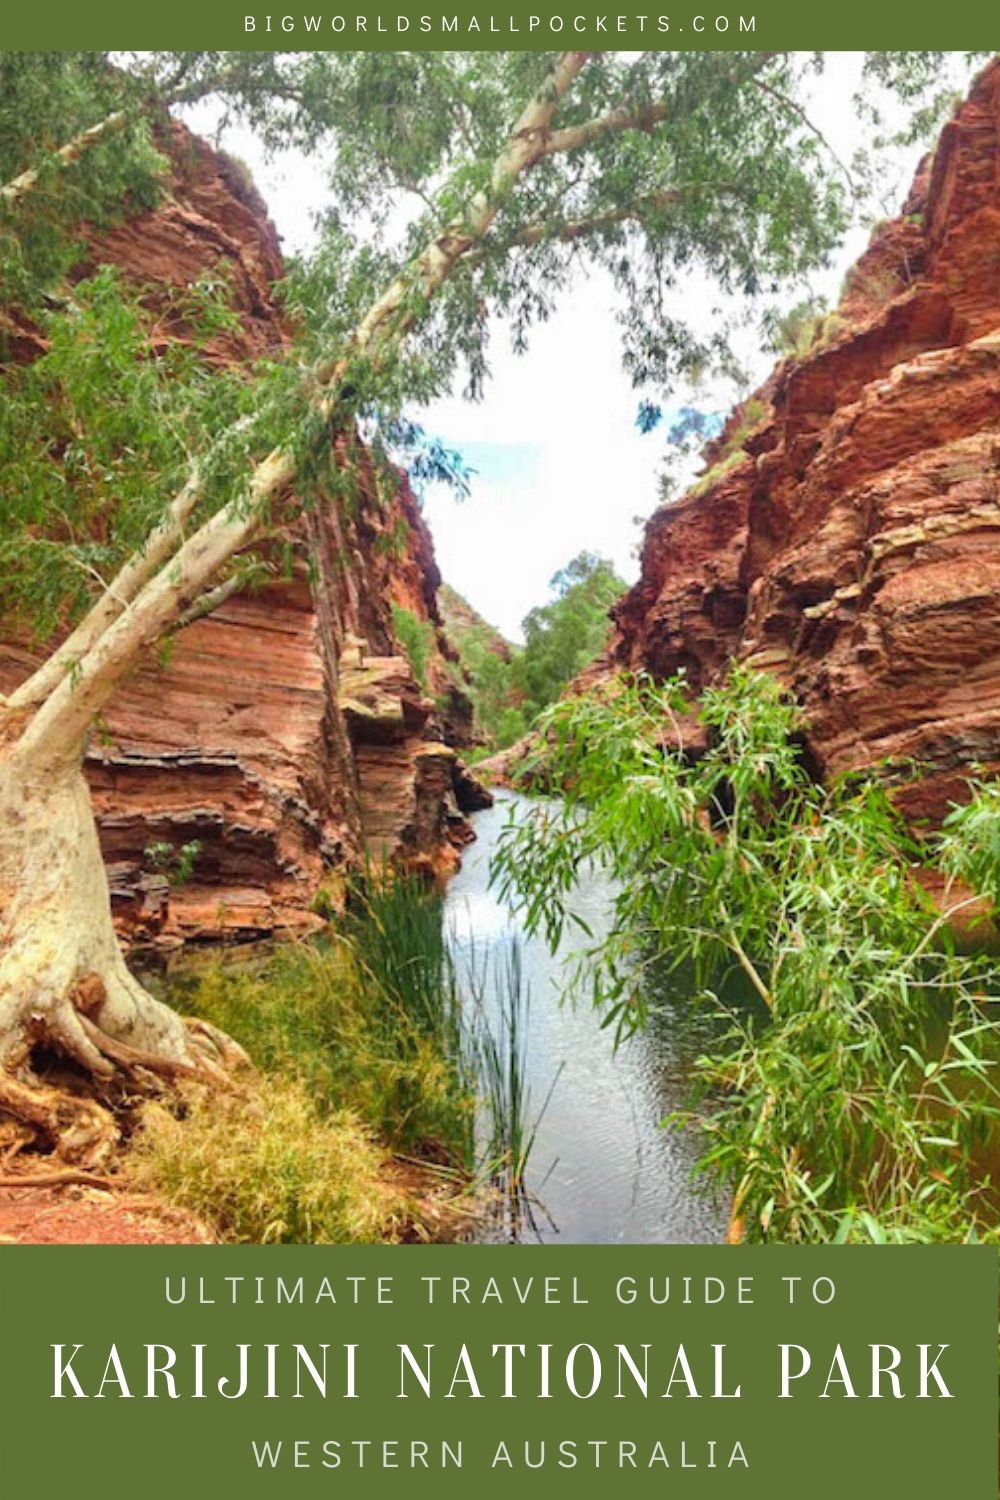 The Ultimate Guide to Visiting Karijini National Park in Western Australia